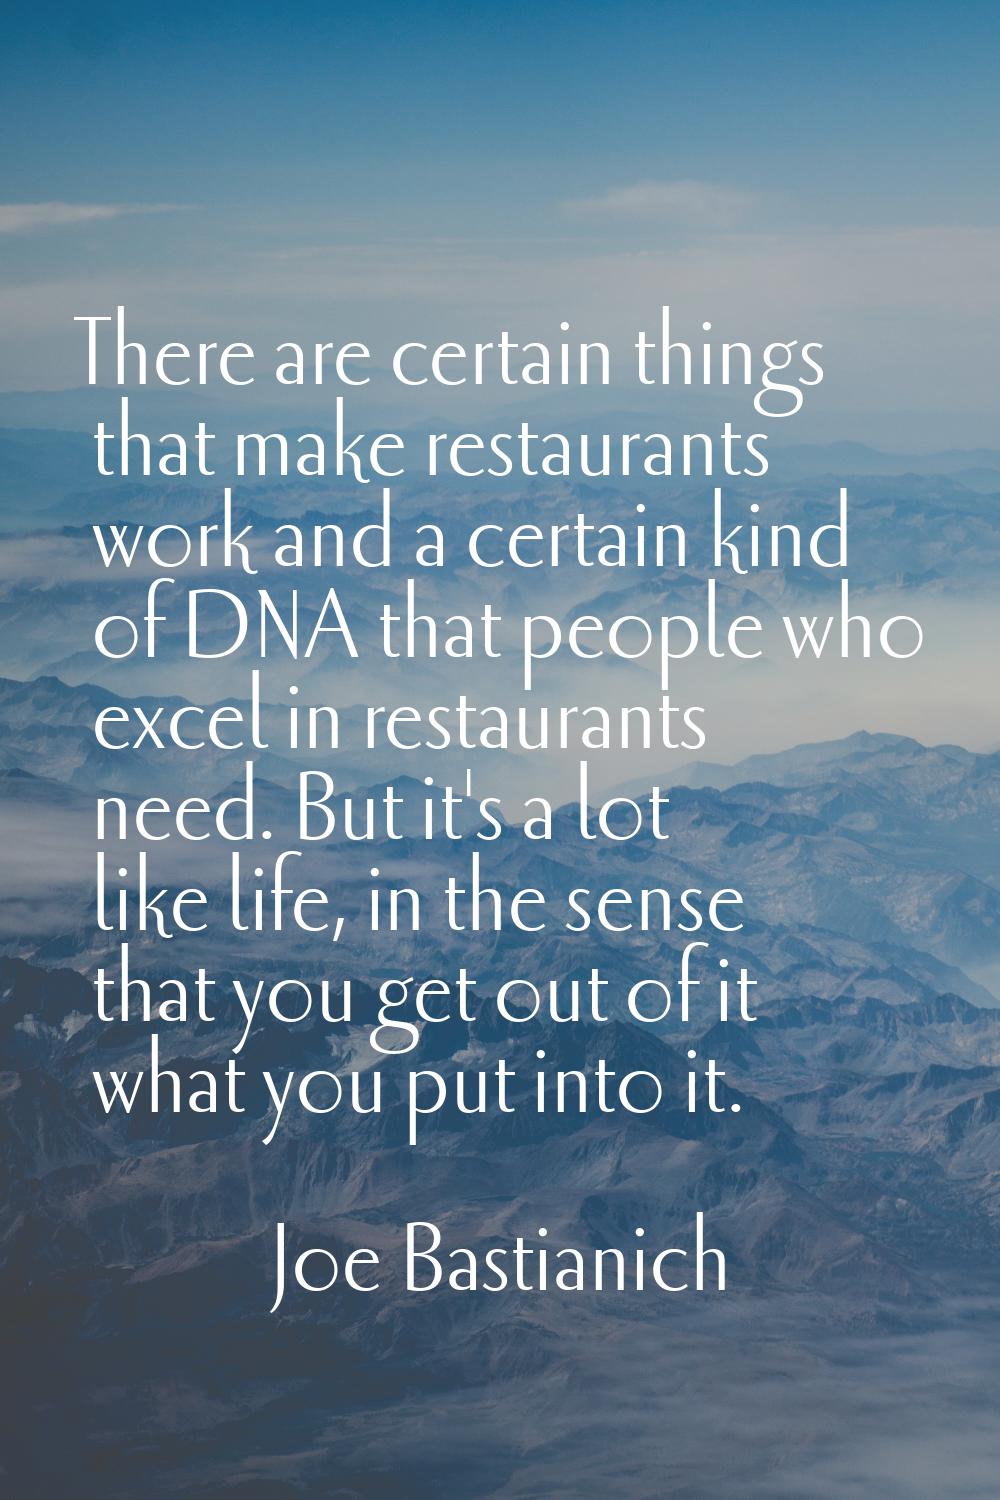 There are certain things that make restaurants work and a certain kind of DNA that people who excel